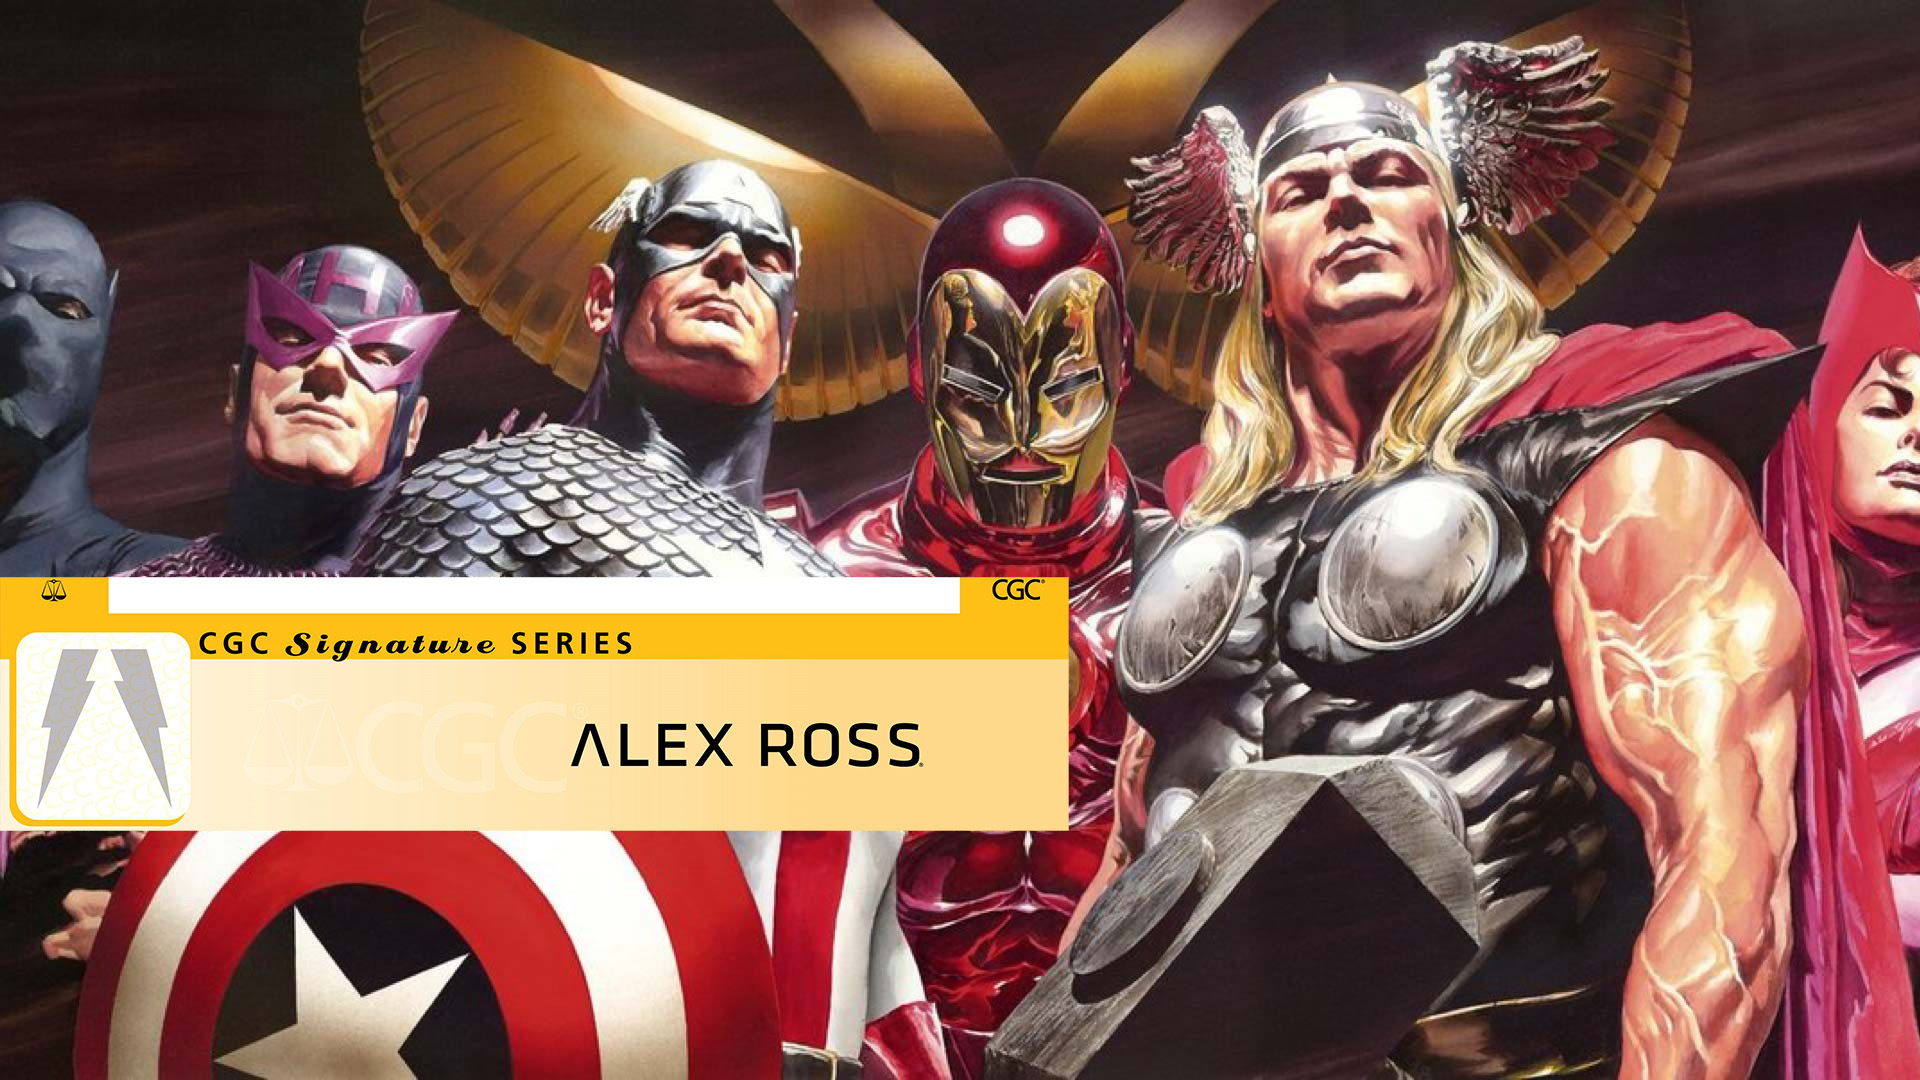 Alex Ross and CGC team up for in-house private signing